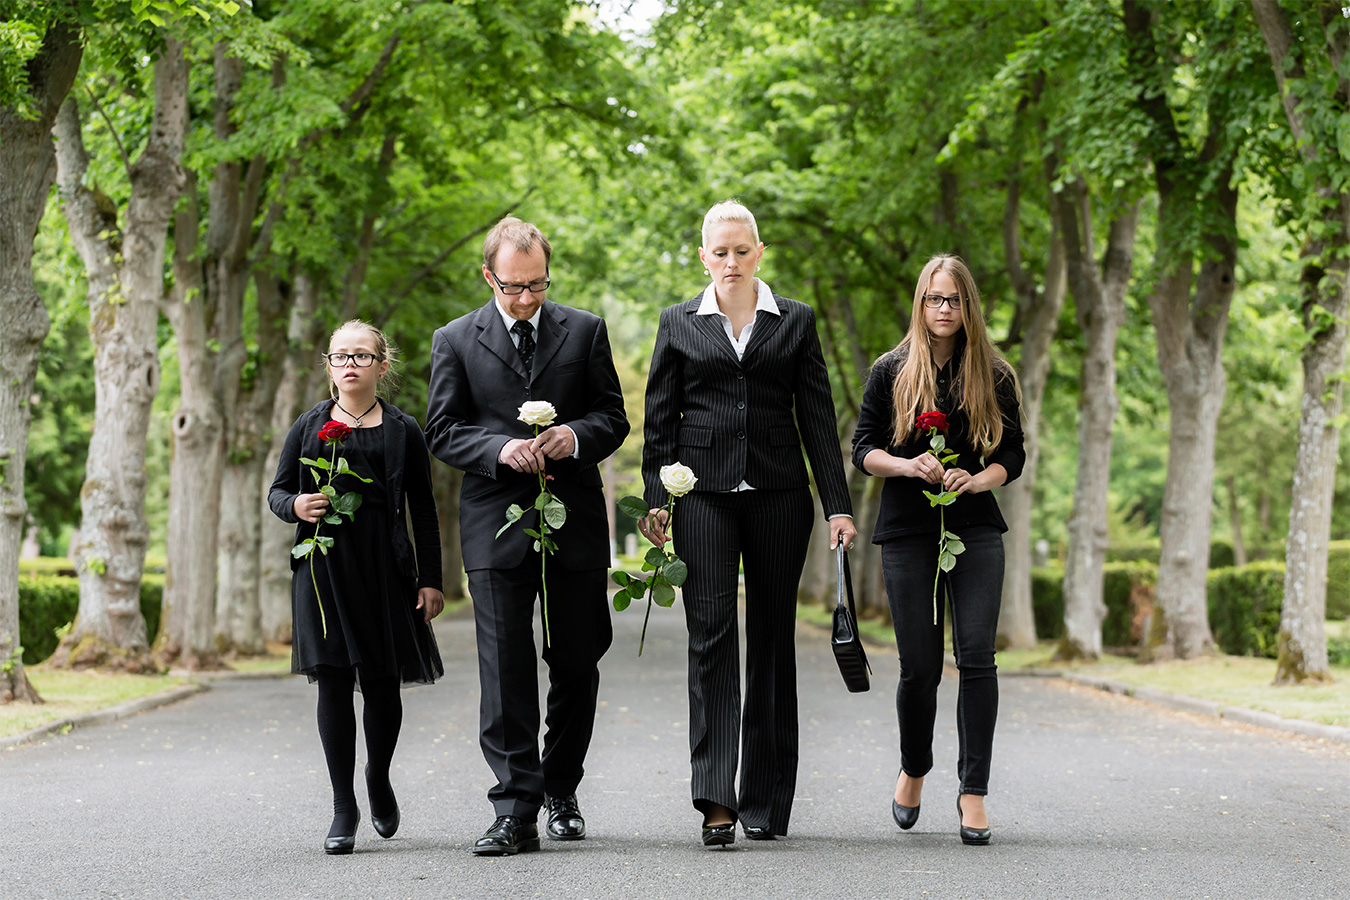 how to dress for a funeral | zazzle ideas